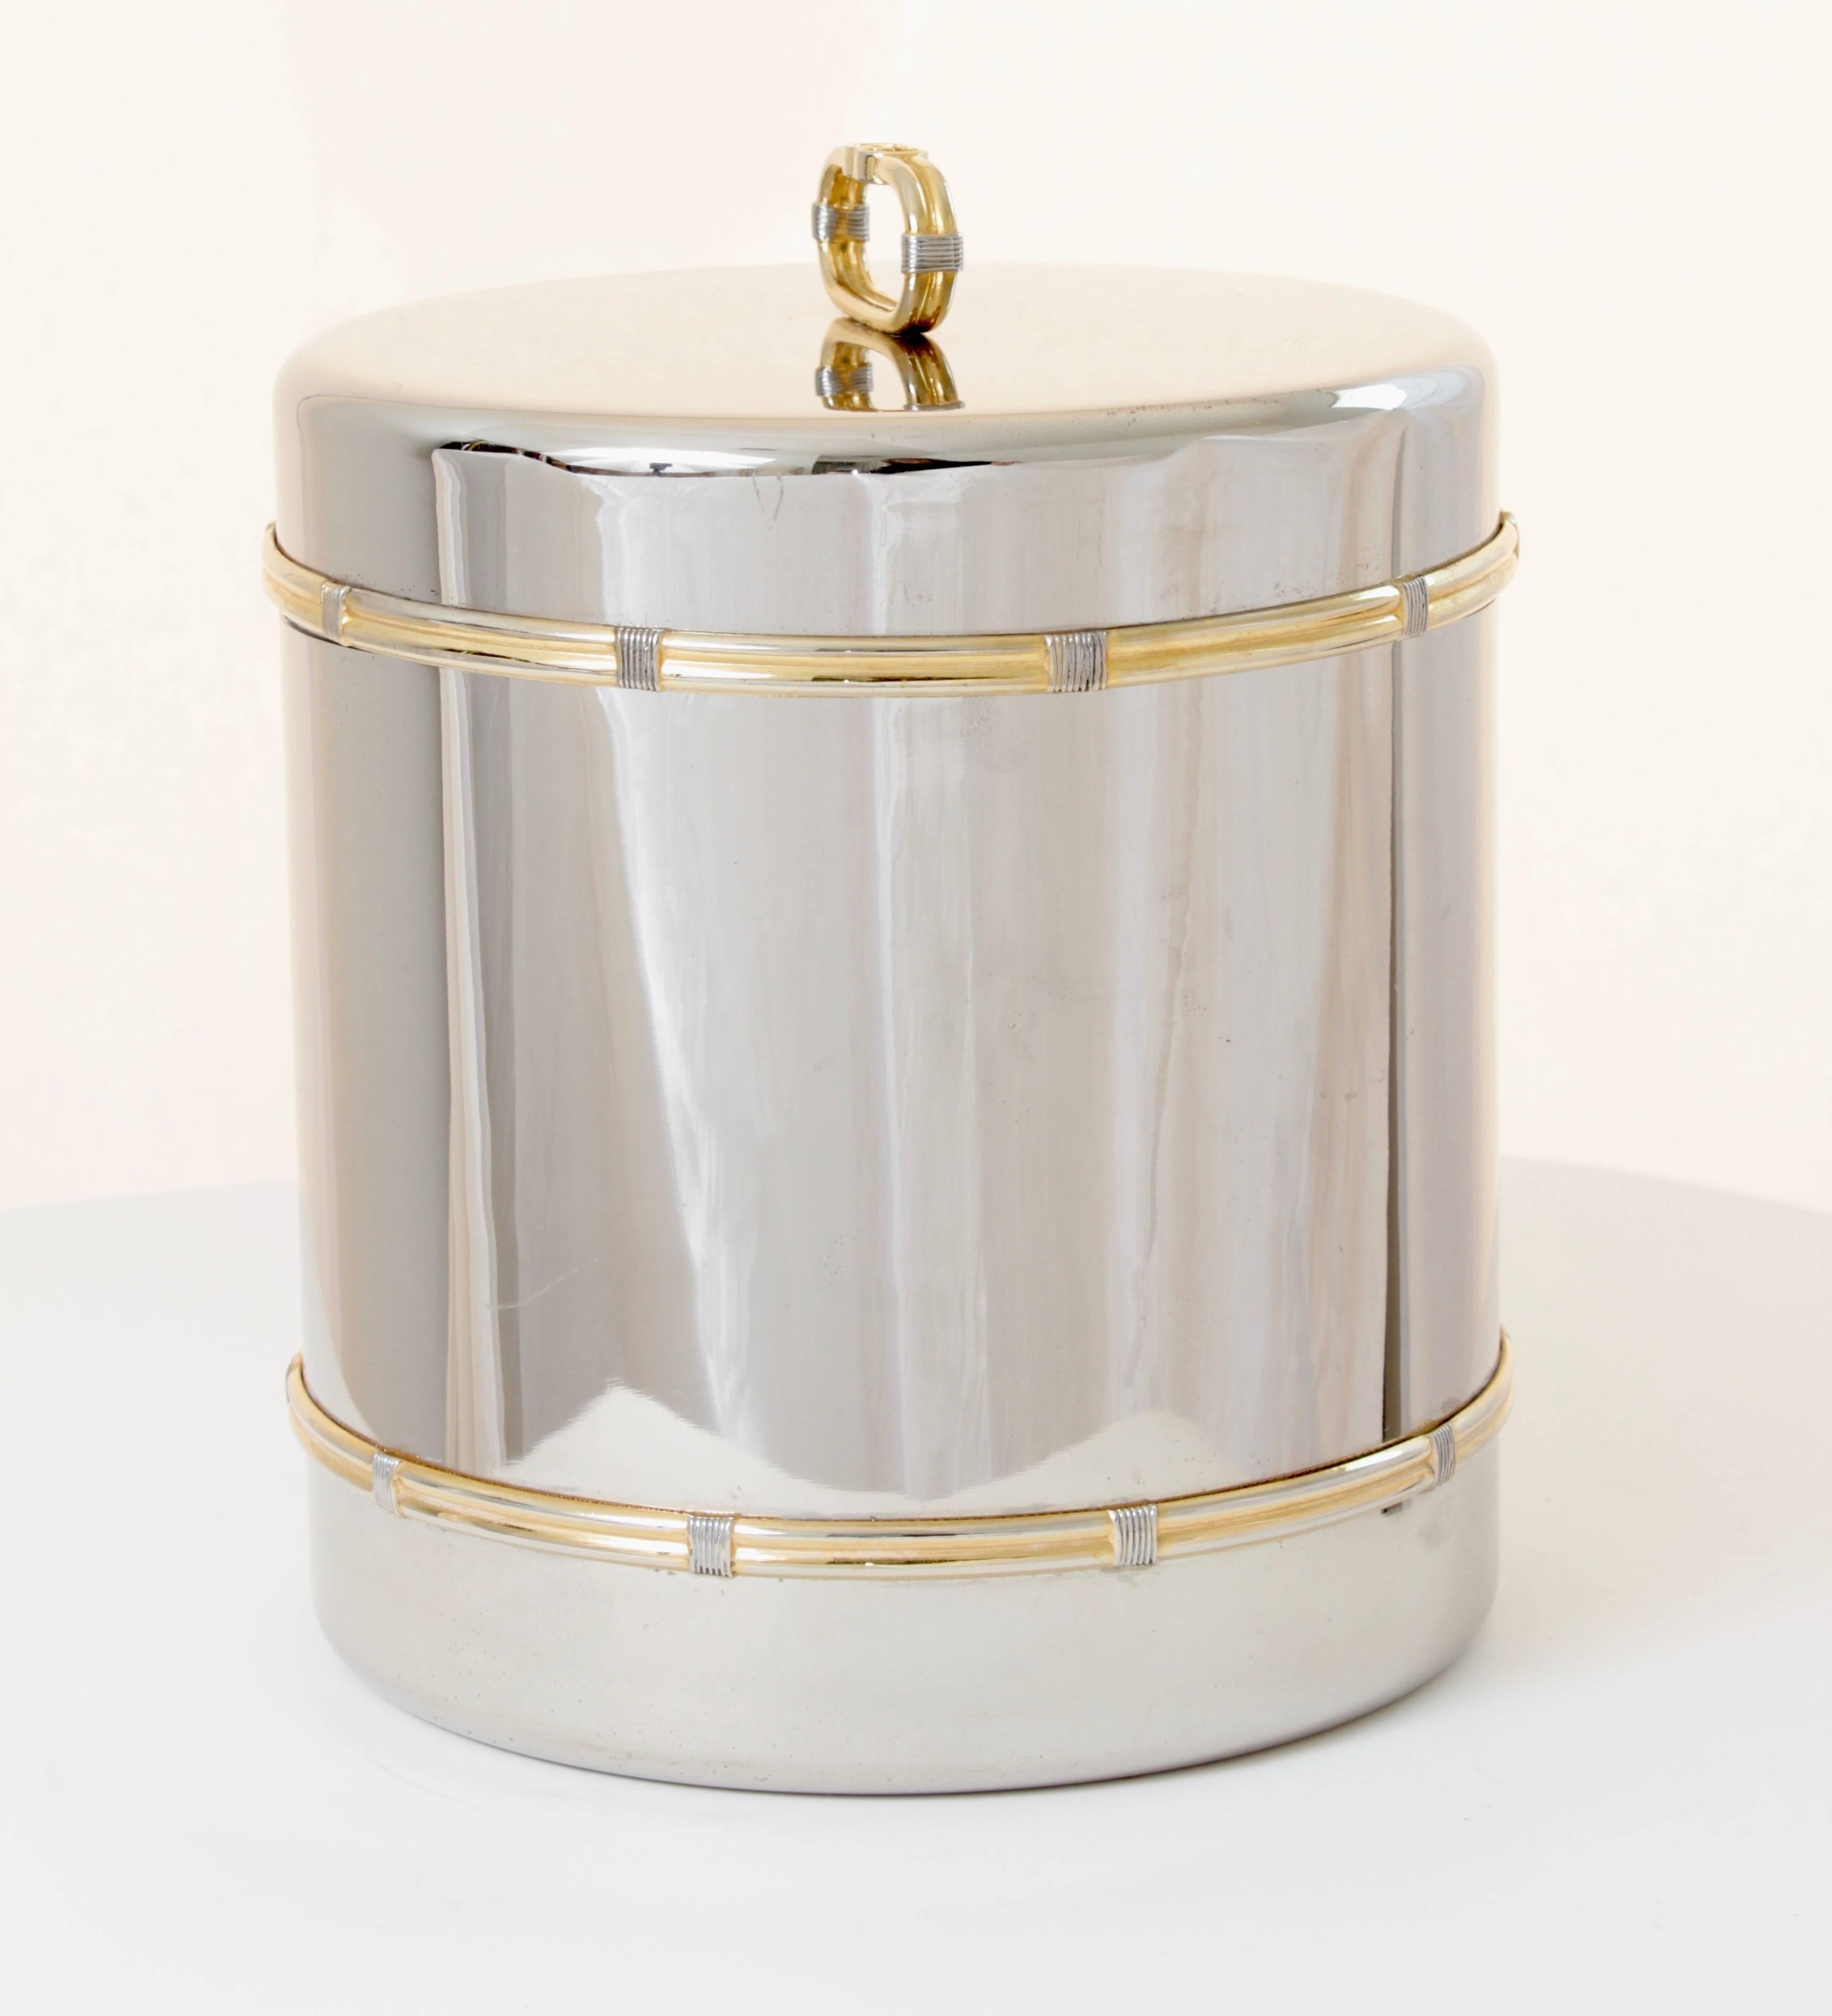 This rare ice bucket or champagne cooler was made by Gucci, most likely in the late 1970s.  Made from a silver metal, it features gold metal rope accents on the cooler and GG logo on the lid handle.  Comes with Gucci GG logo ice tongs.  Both barware